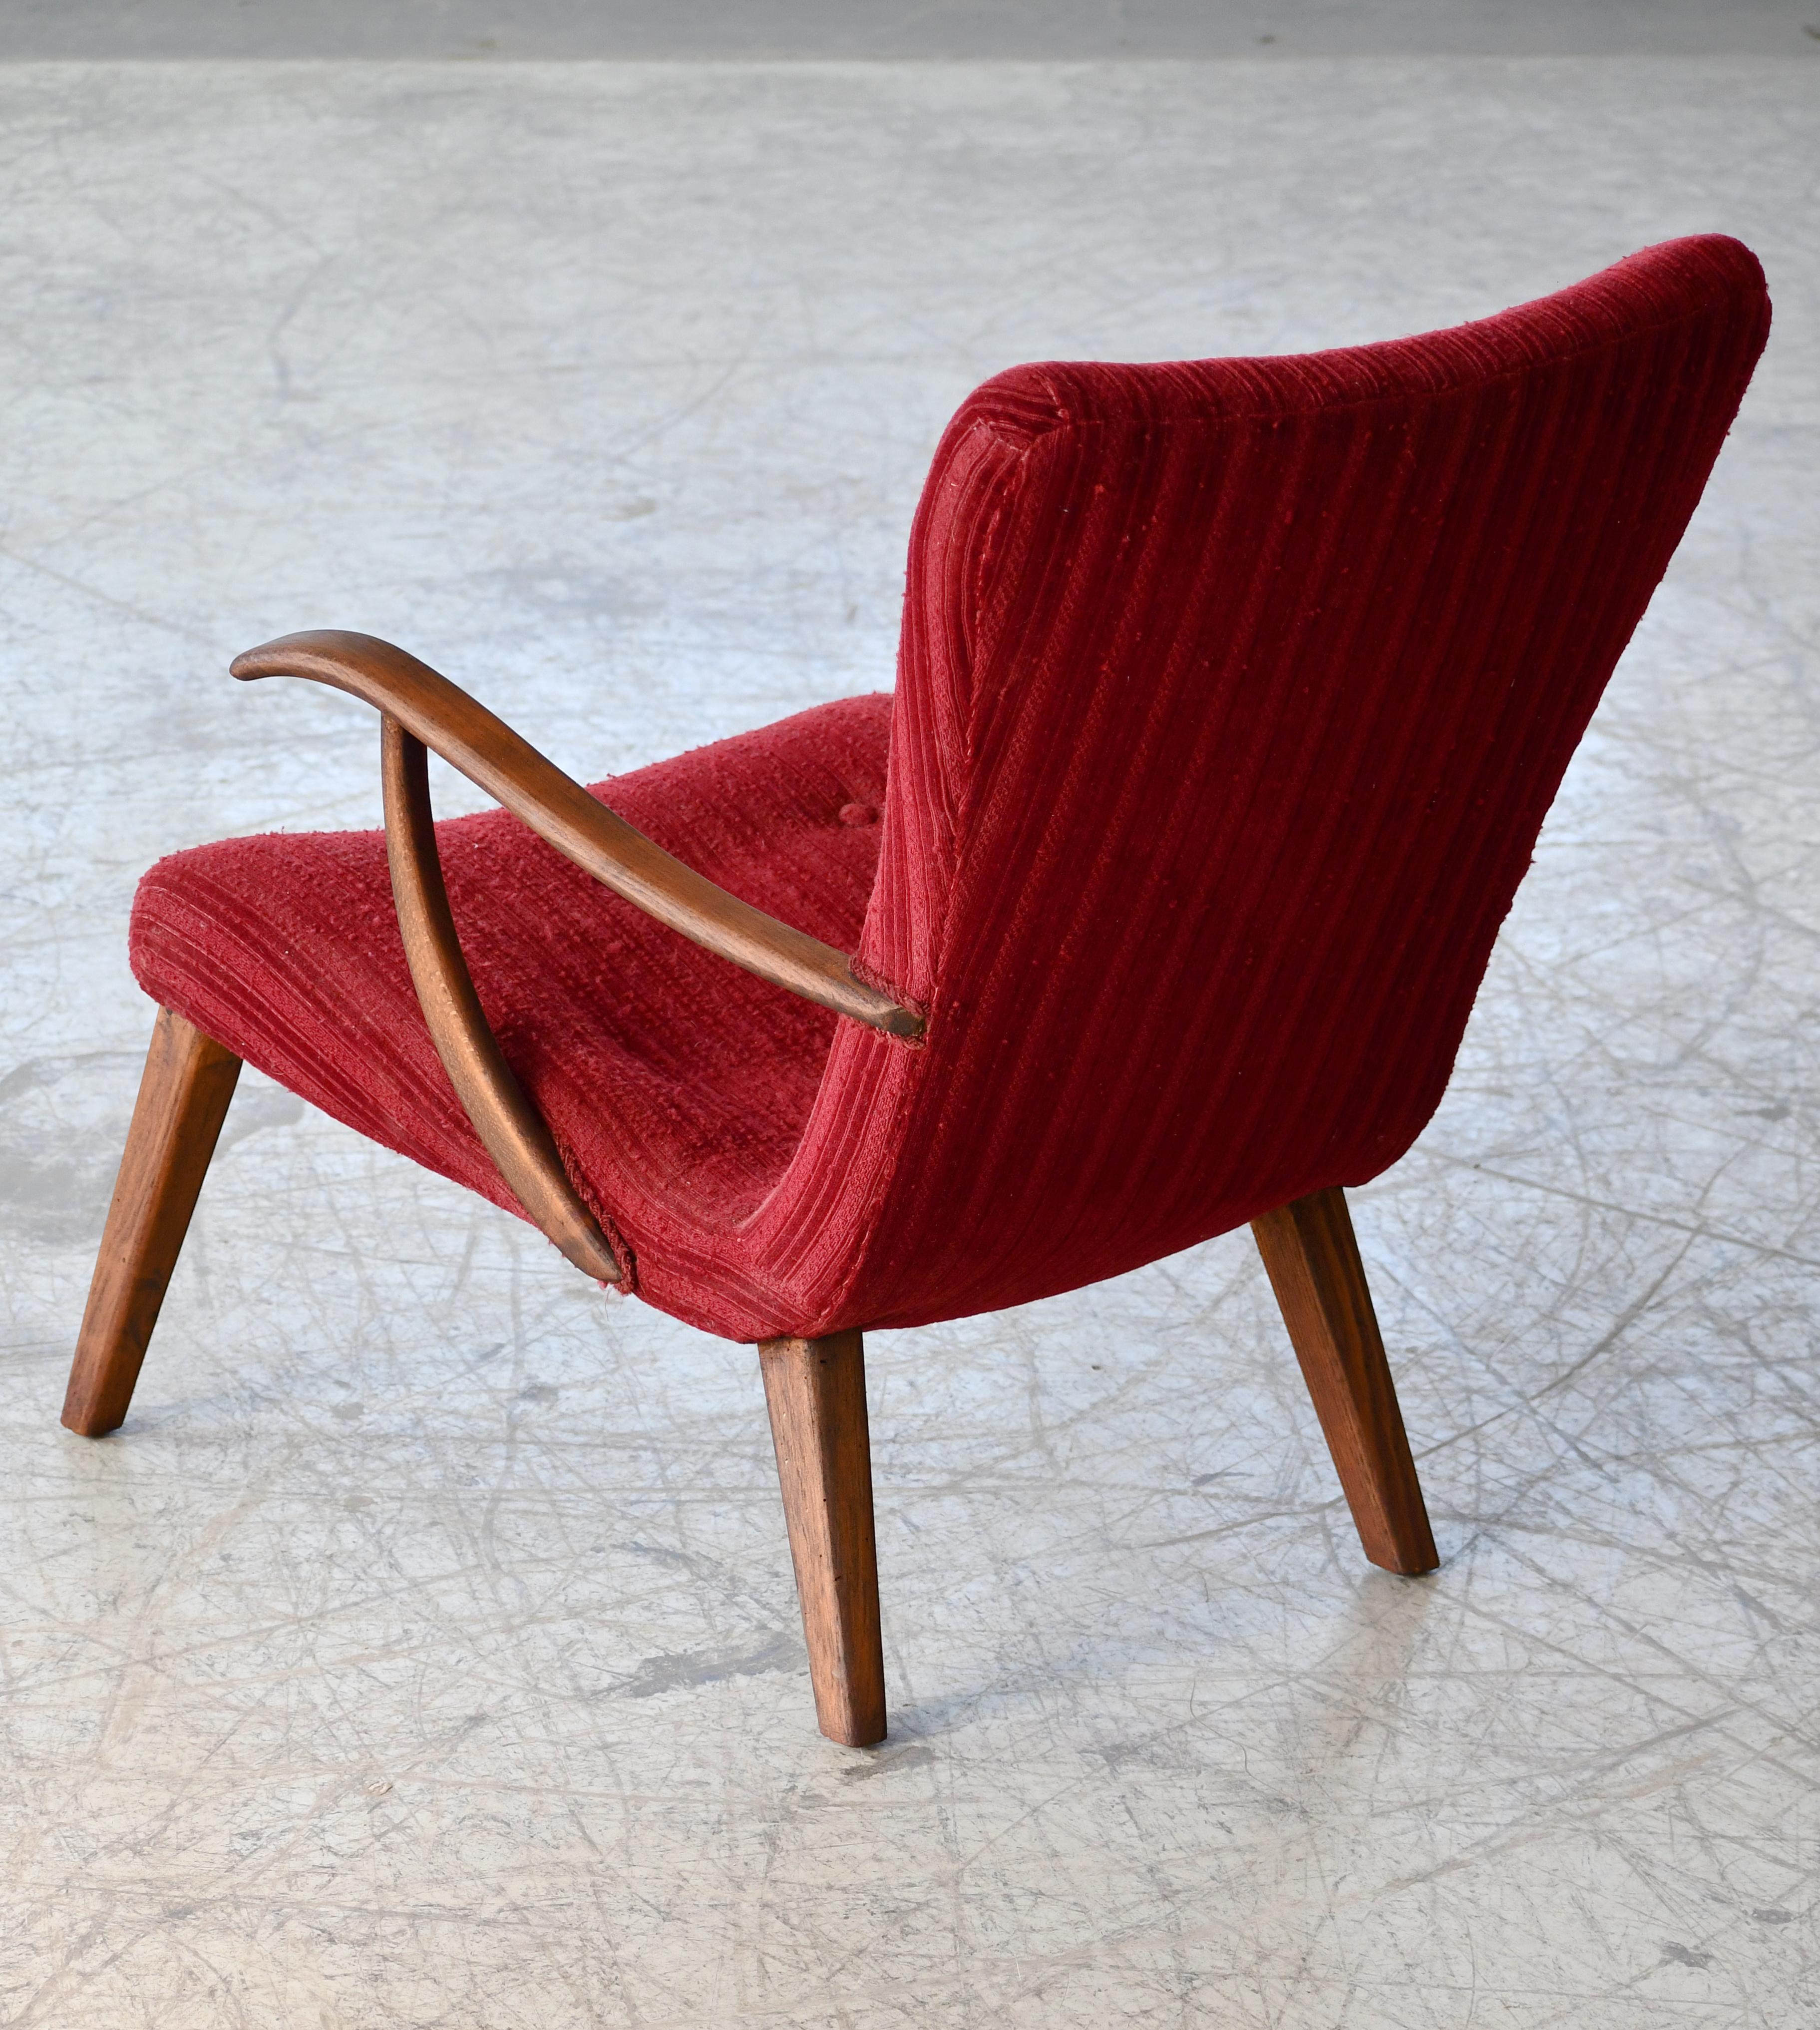 Beech Midcentury Danish Clam Style Lounge Chair, 1950s For Sale